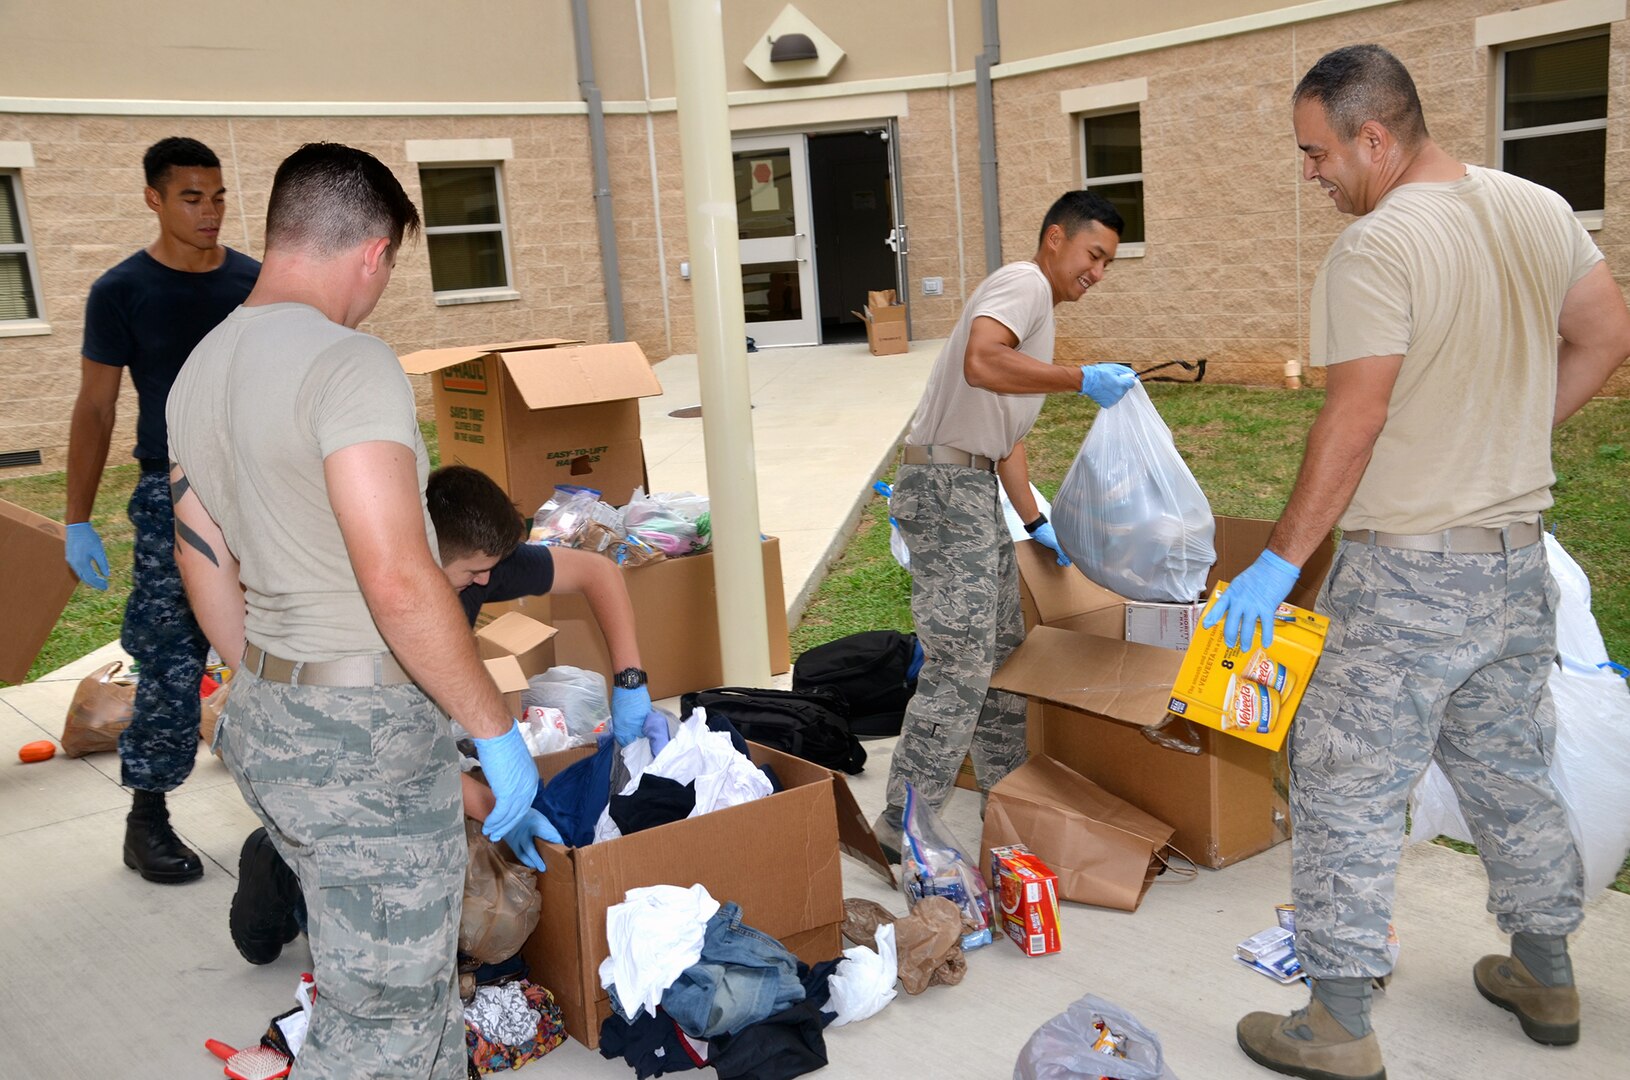 Air Force,  Navy and civilian volunteers from the Medical Education and Training Campus (METC), 59th Training Group, and Navy Medicine Training Support Center (NMTSC) unload donations collected for victims of Hurricane Harvey to the sorting area Sept. 19. In all, the team collected and donated 450 pounds of food to the San Antonio Food Bank, $3,300 in donated diapers to the Diaper Bank, $19,000 in clothing and incidentals to the Salvation Army, and numerous donations to the American Society for the Prevention of Cruelty to Animals and homeless shelters.